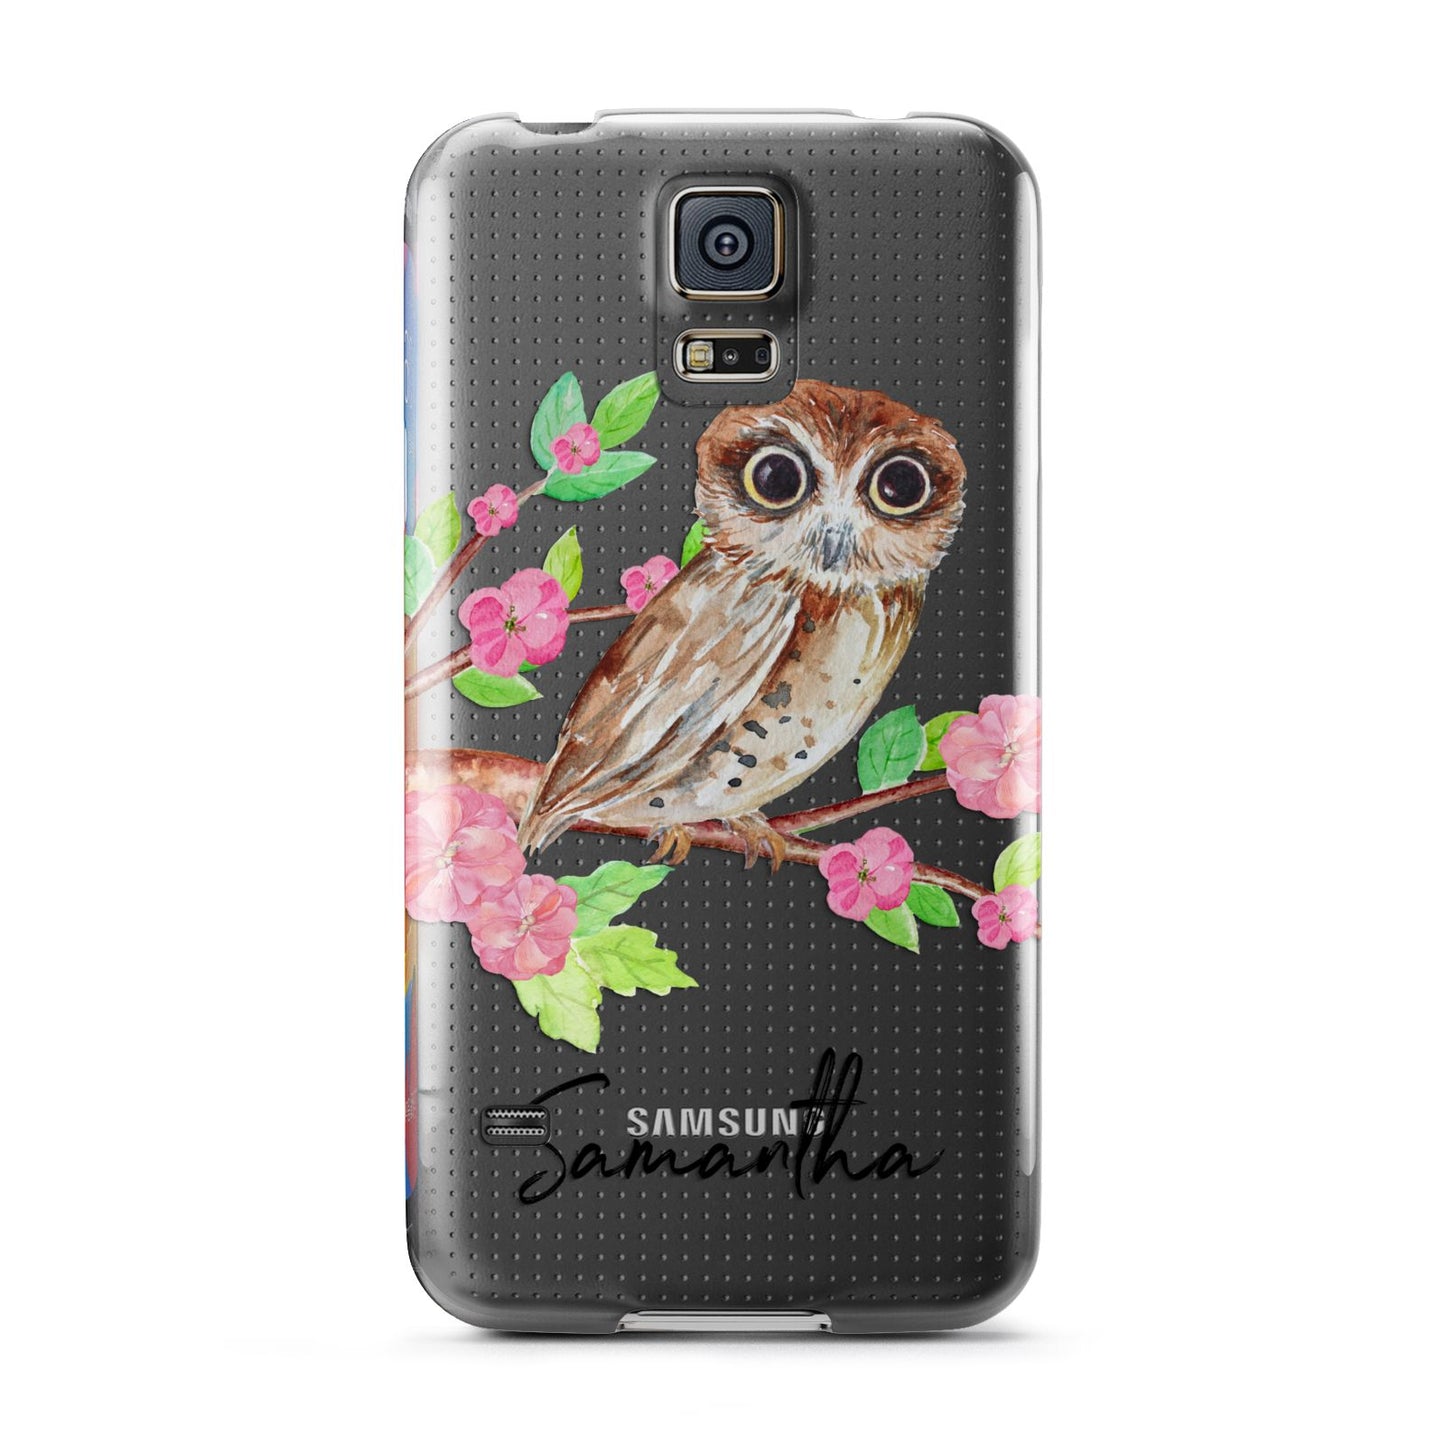 Personalised Owl Samsung Galaxy S5 Case